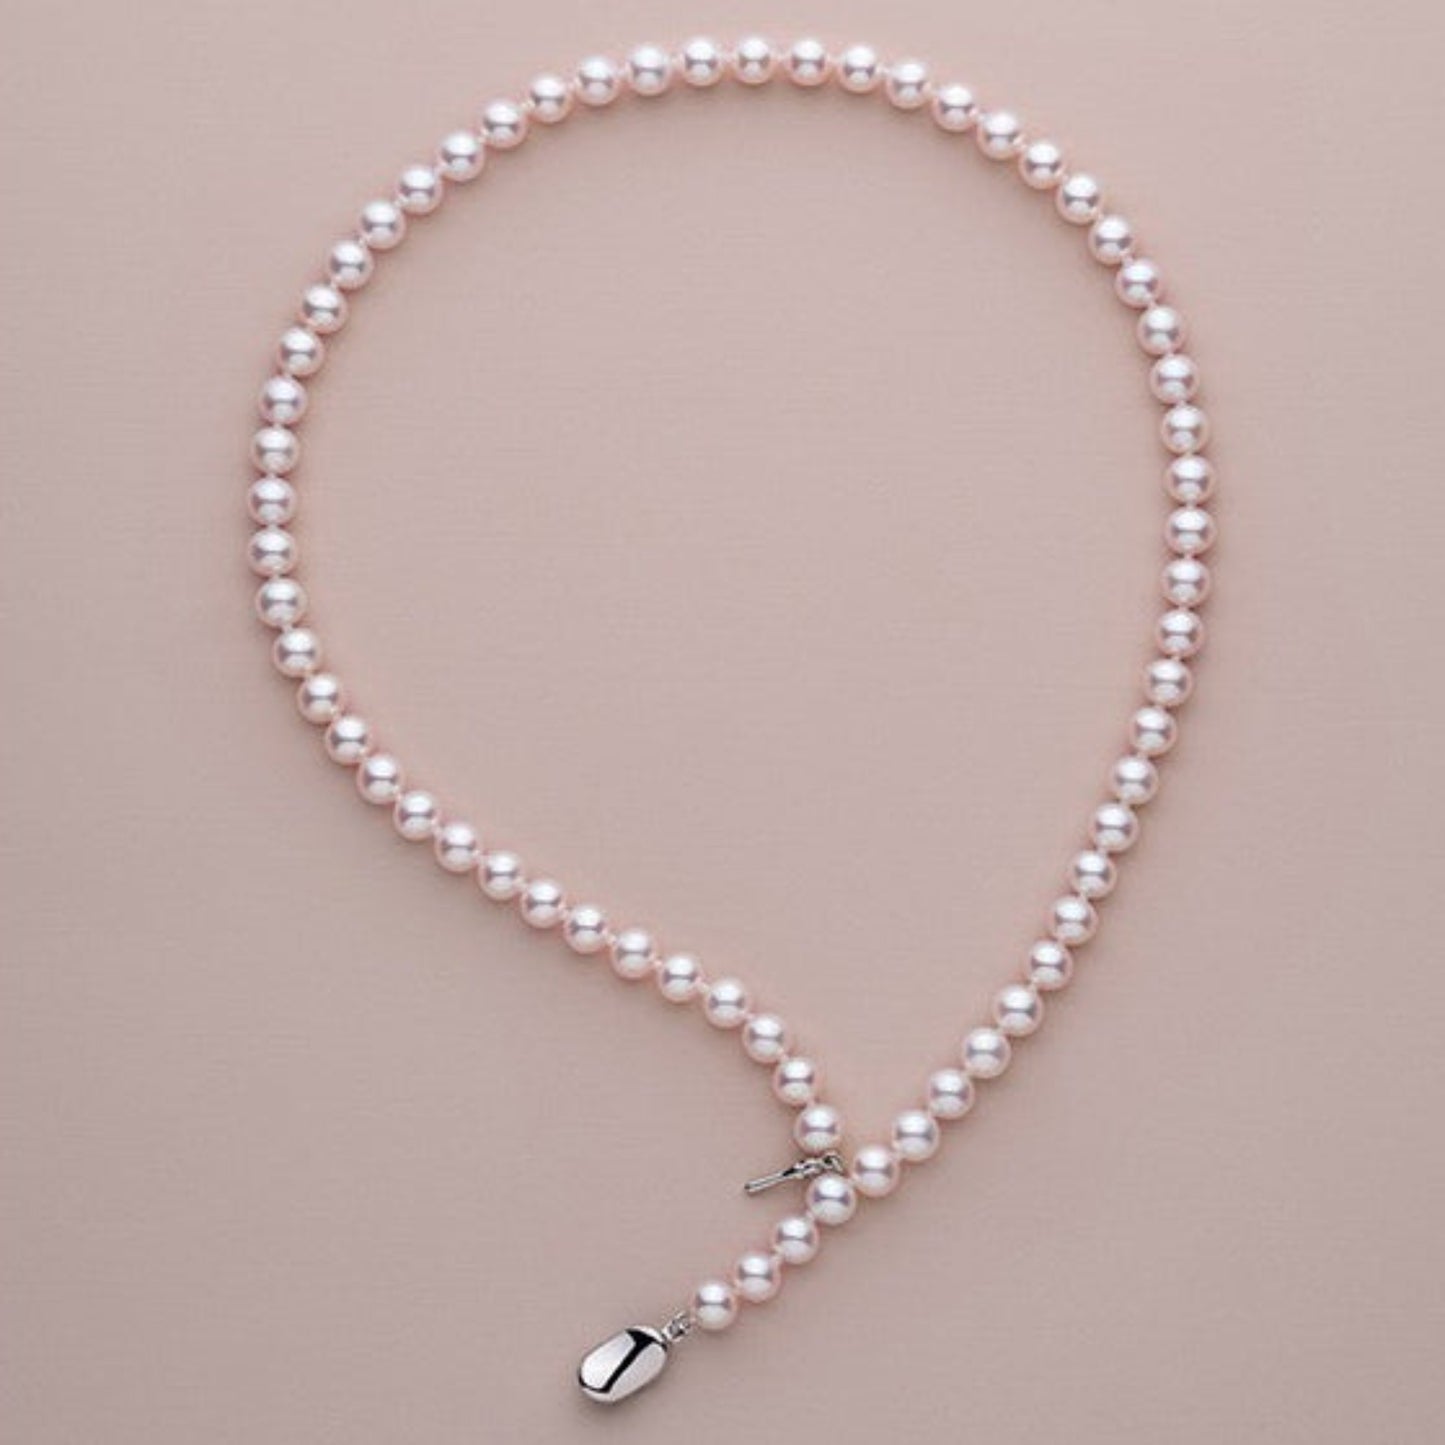 6-7mm Freshwater Pearl Necklace, Perfect Round